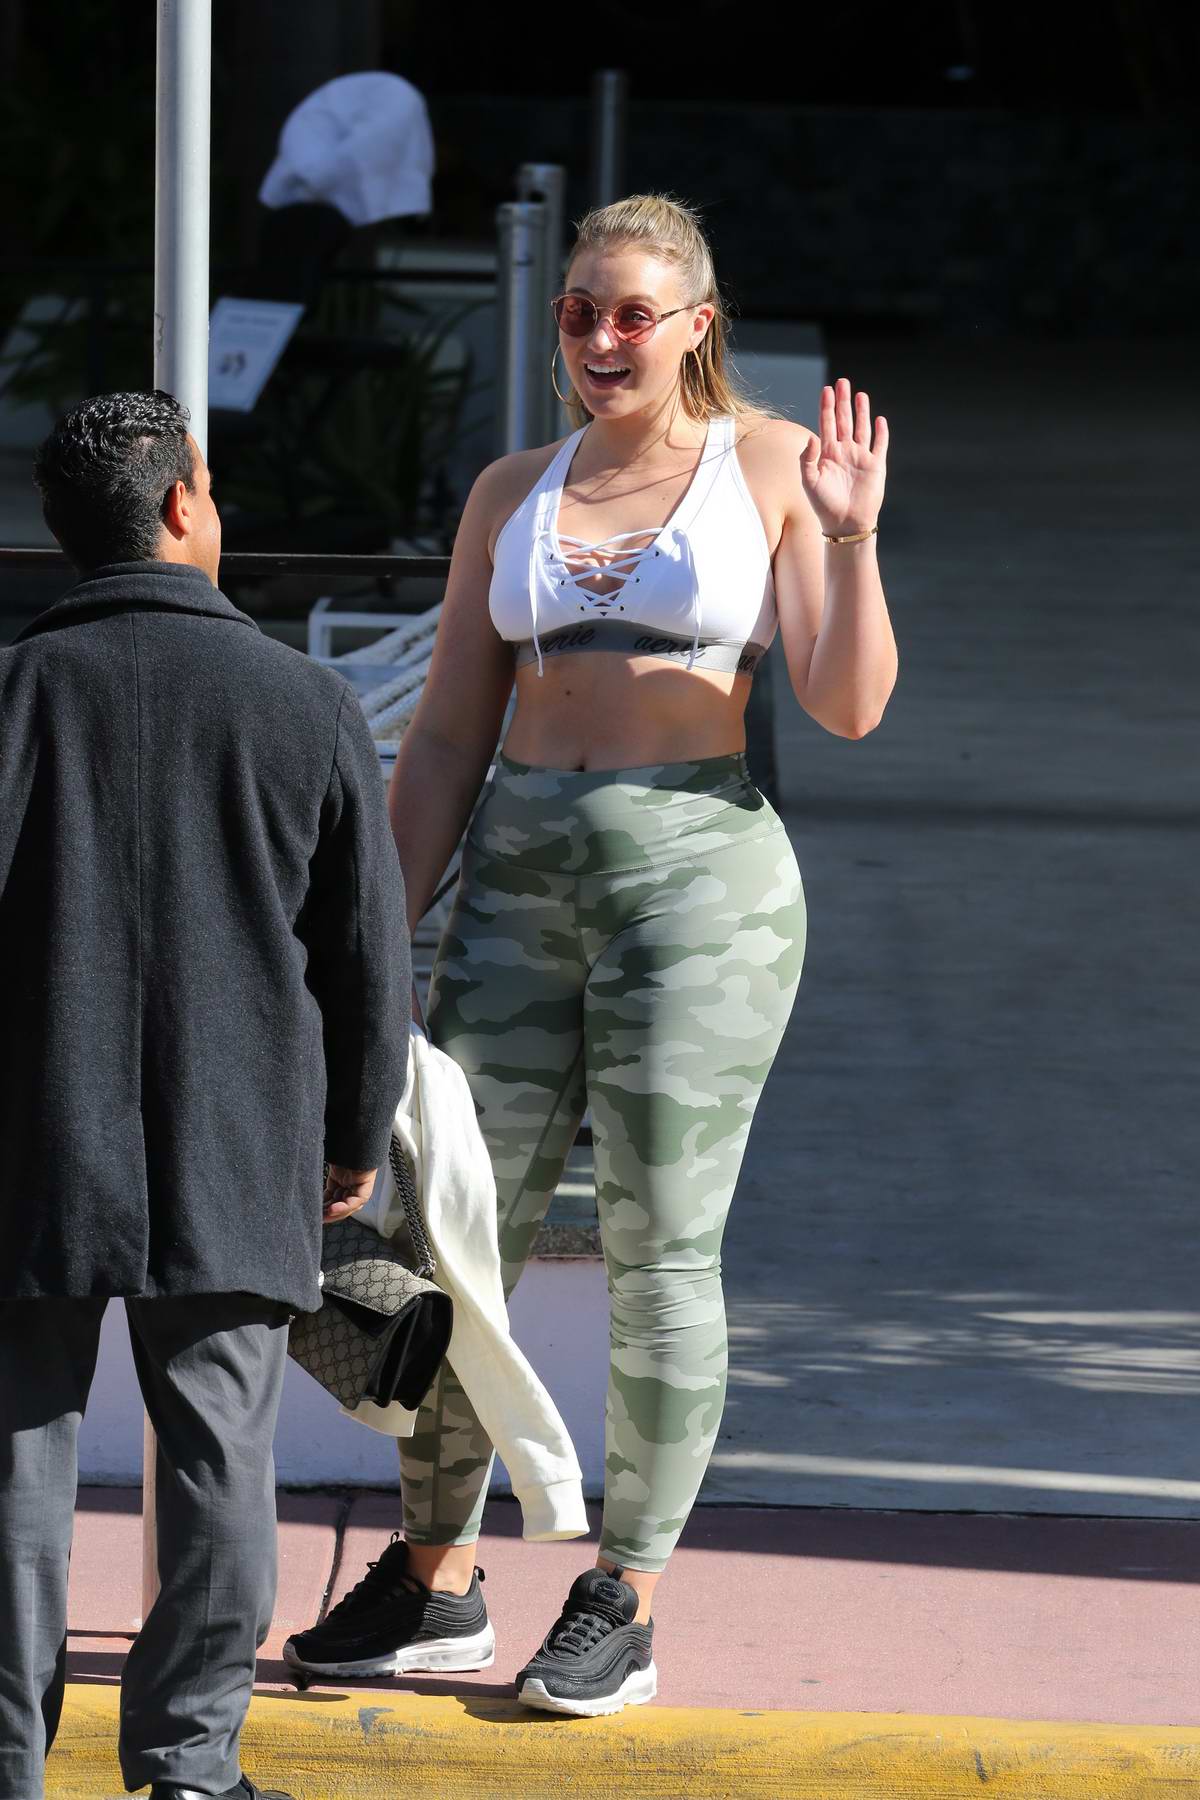 Iskra Lawrence wearing camo yoga pants and a sports bra as she